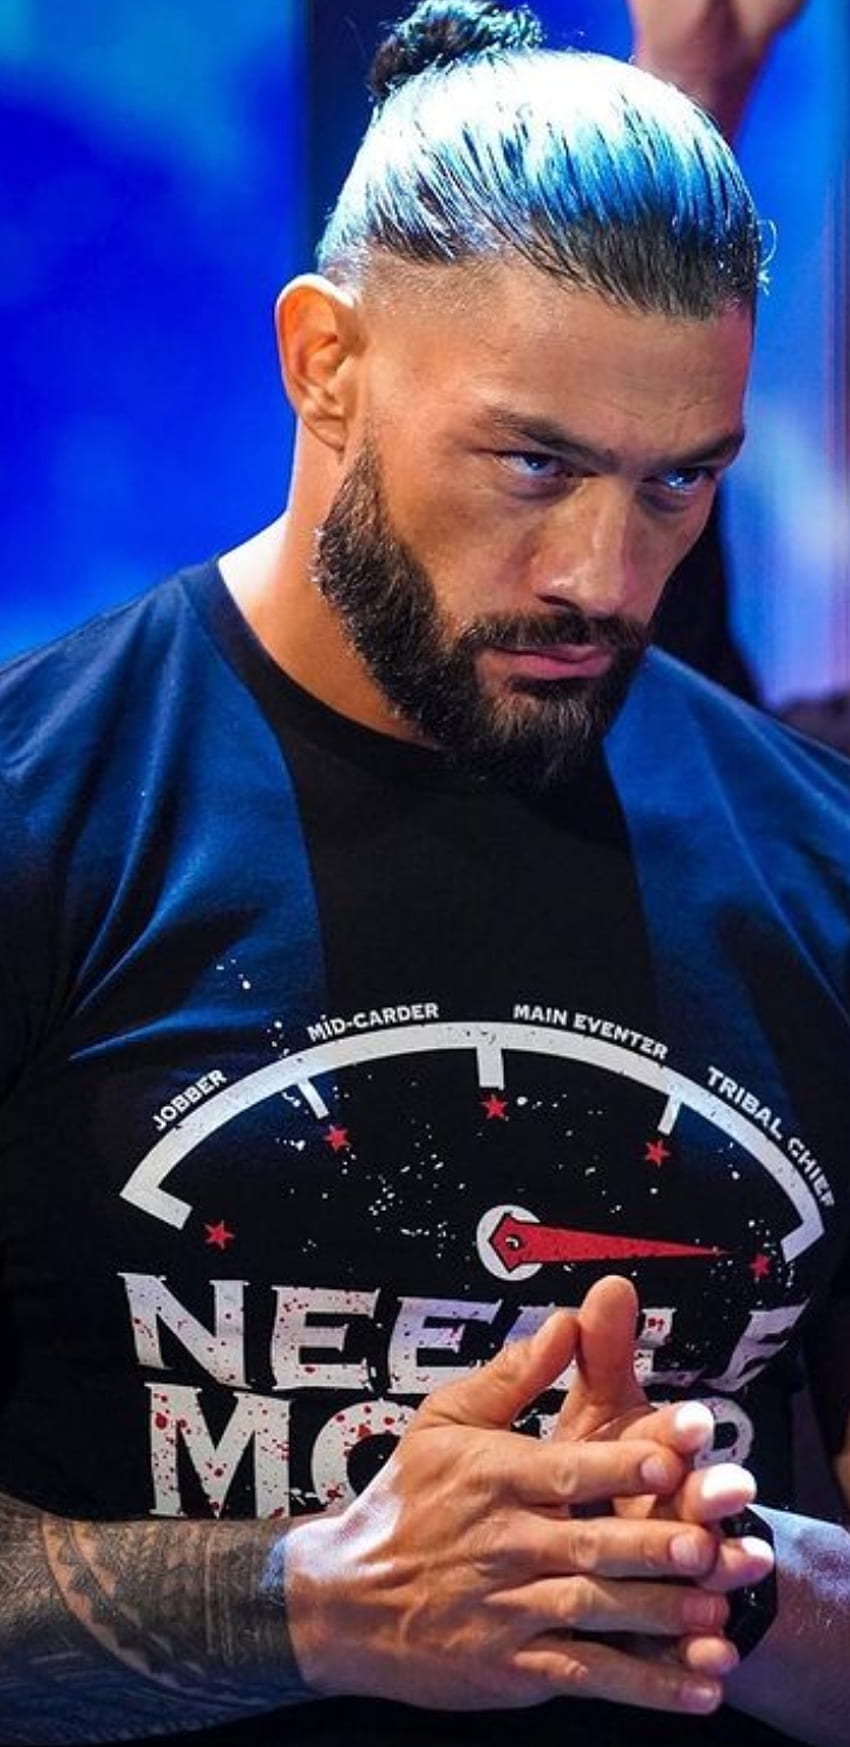 Bald Roman Reigns Picture Goes Viral WWE Fans Lose Their Minds   Sportsmanor